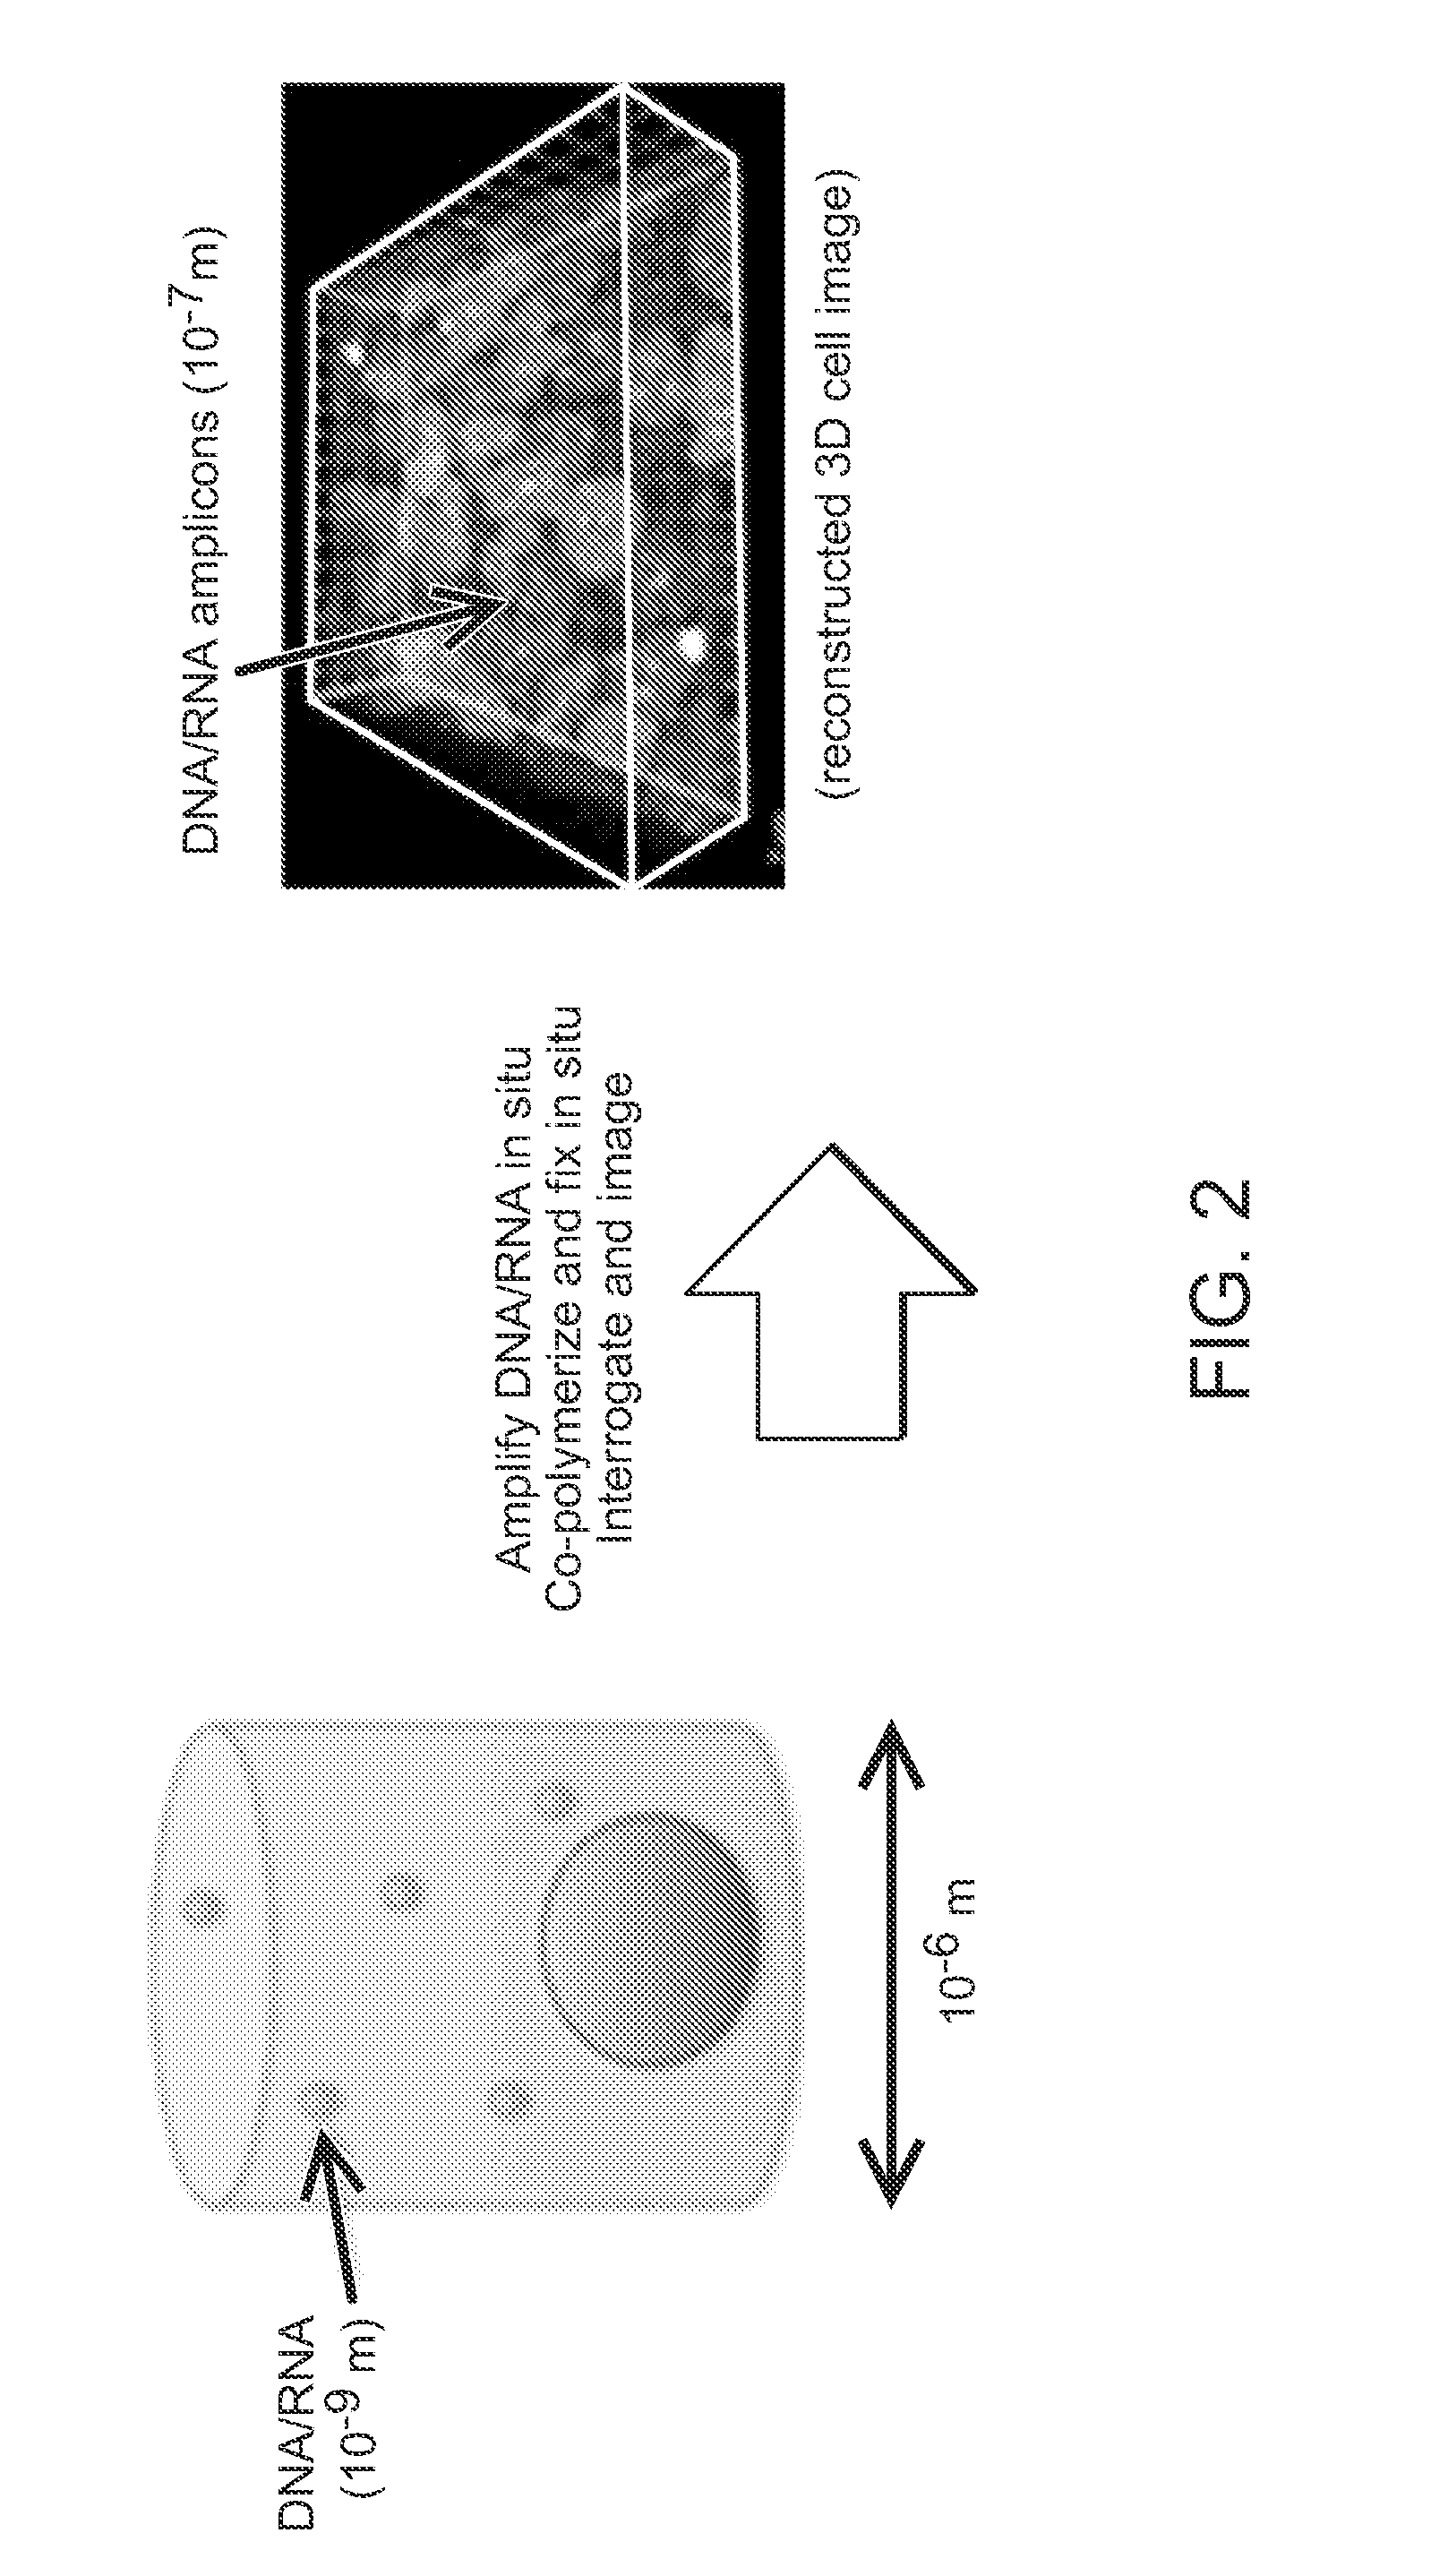 Method for Generating A Three-Dimensional Nucleic Acid Containing Matrix